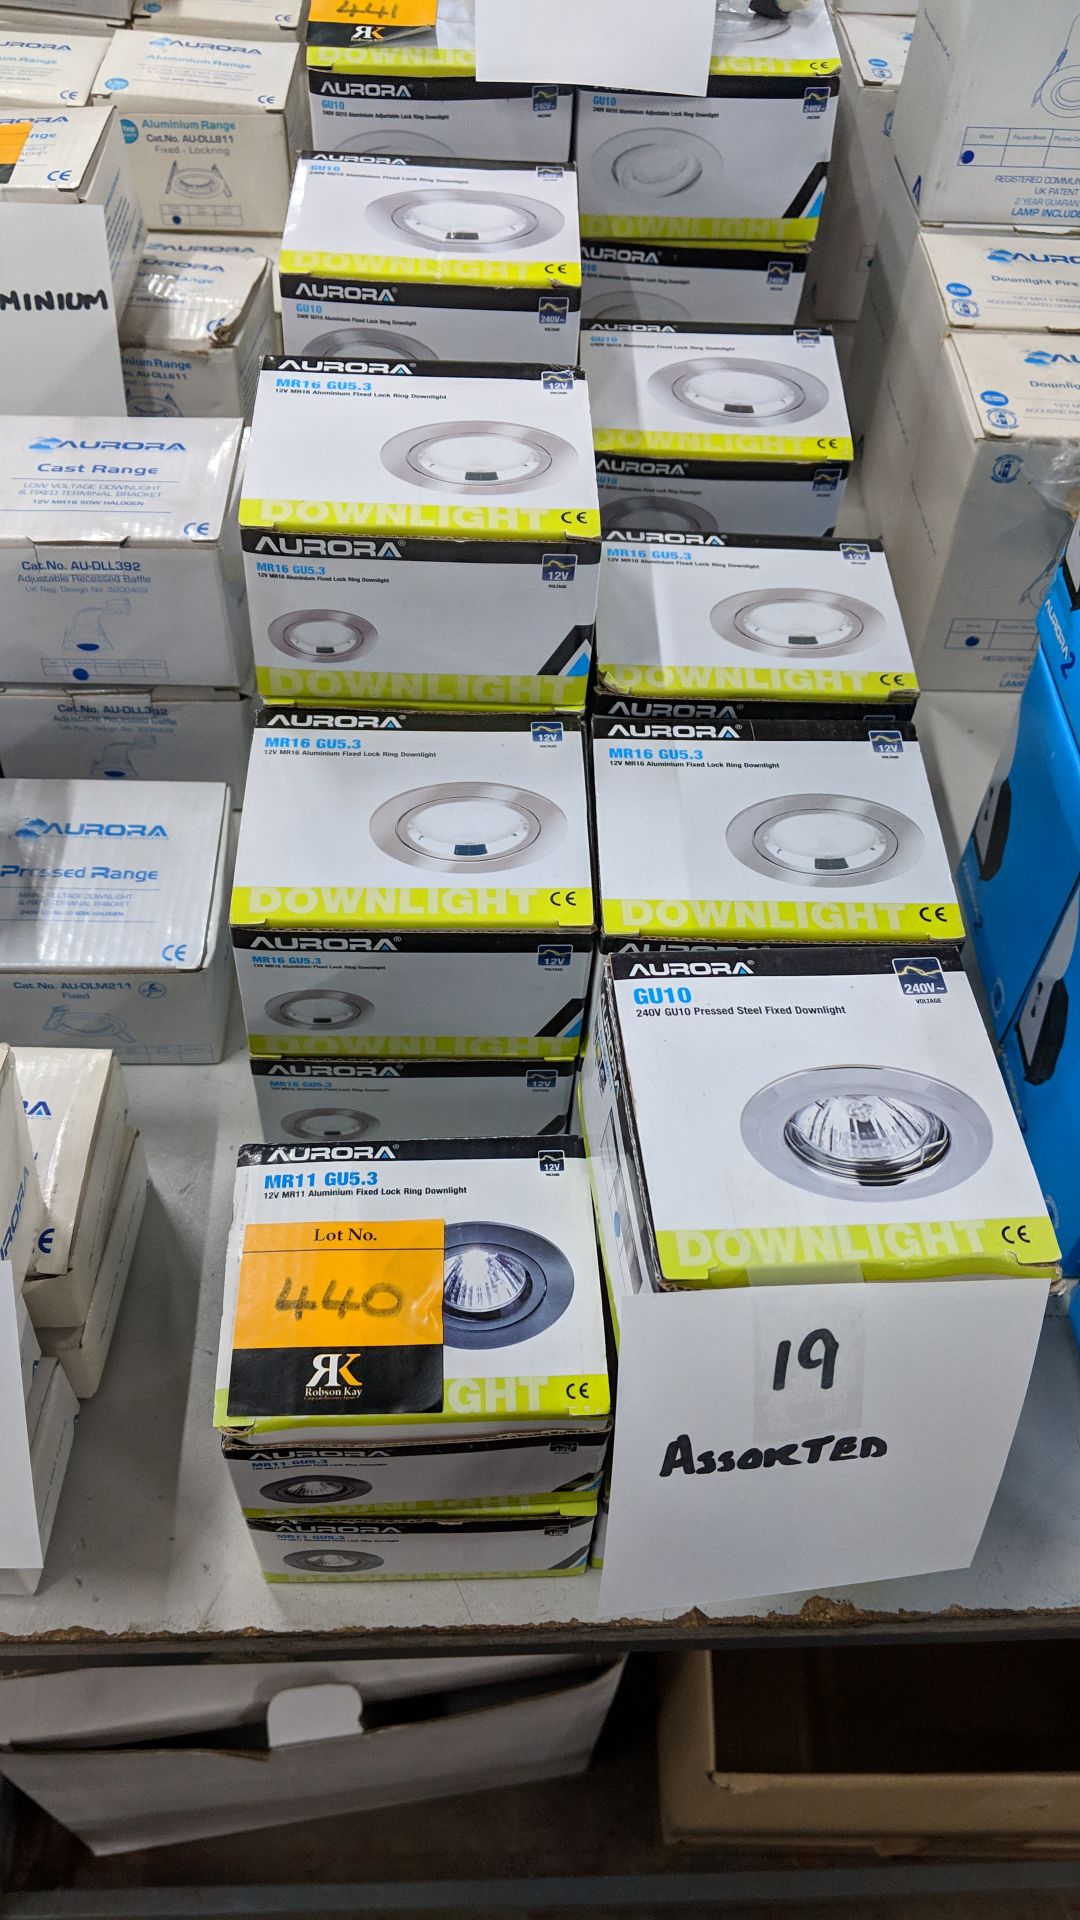 19 off assorted Aurora GU10 & GU5.3 downlights This lot is one of a number of lots in this sale